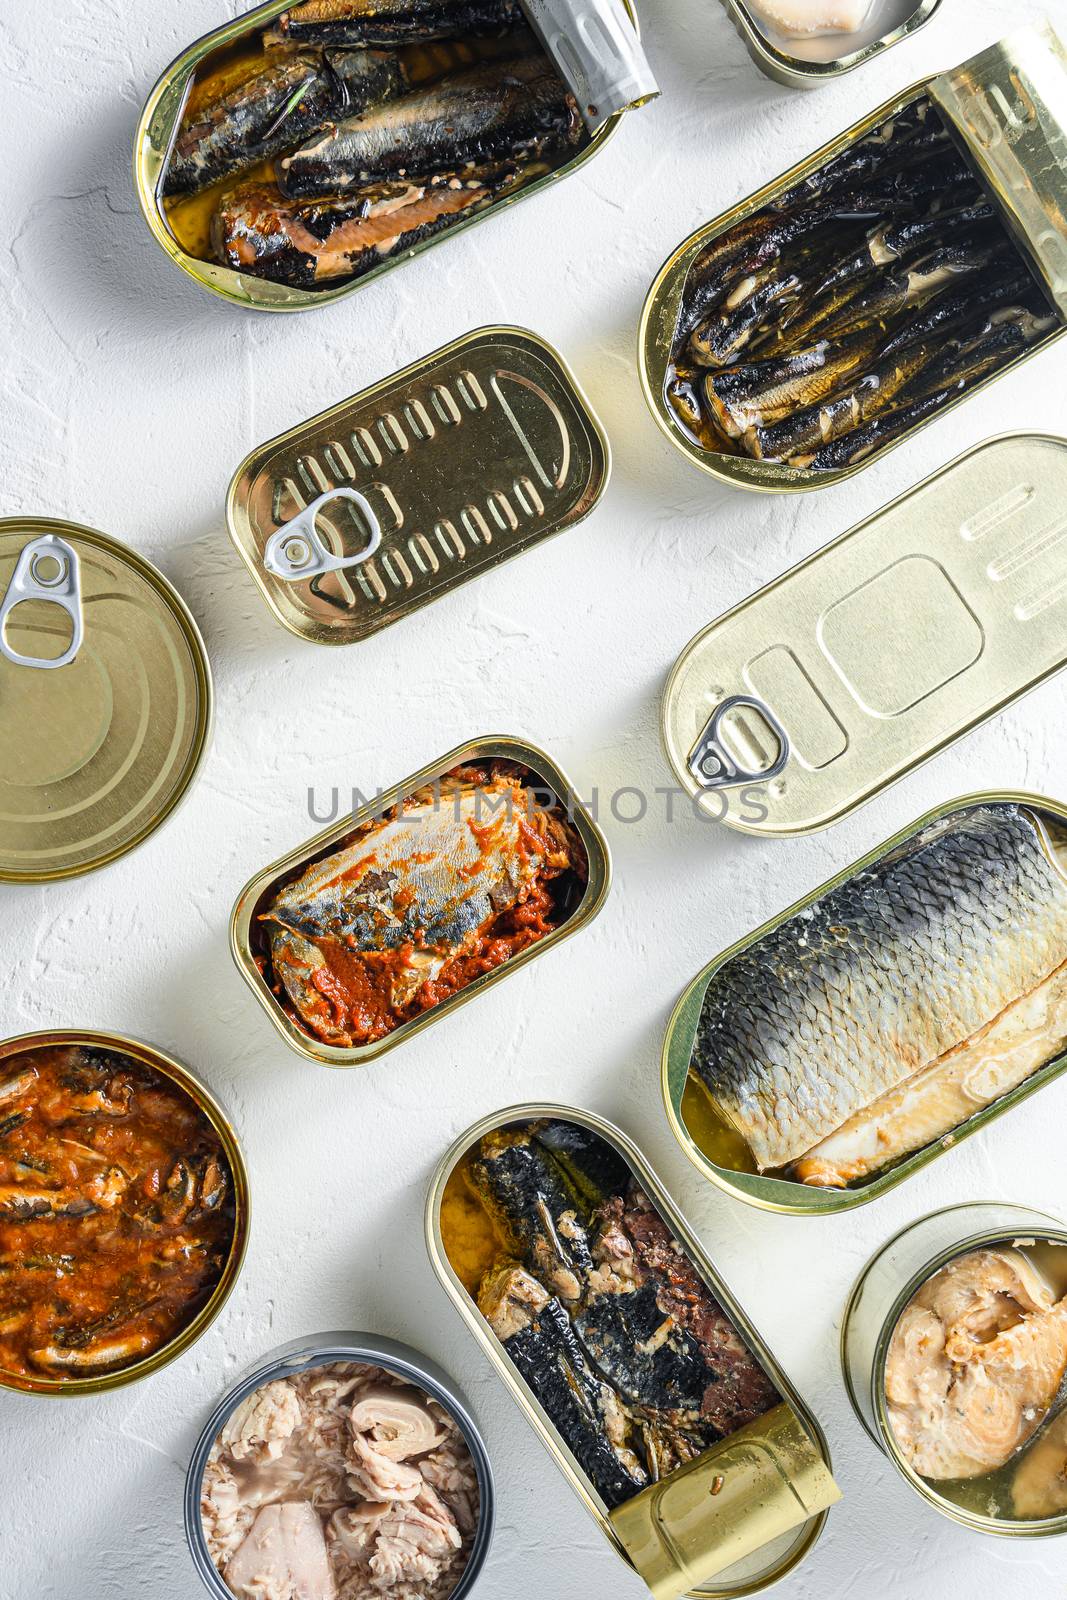 Conserves of canned fish with different types of fish and seafood, opened and closed cans with Saury, mackerel, sprats, sardines, pilchard, squid, tuna, over white stone surface top view by Ilianesolenyi